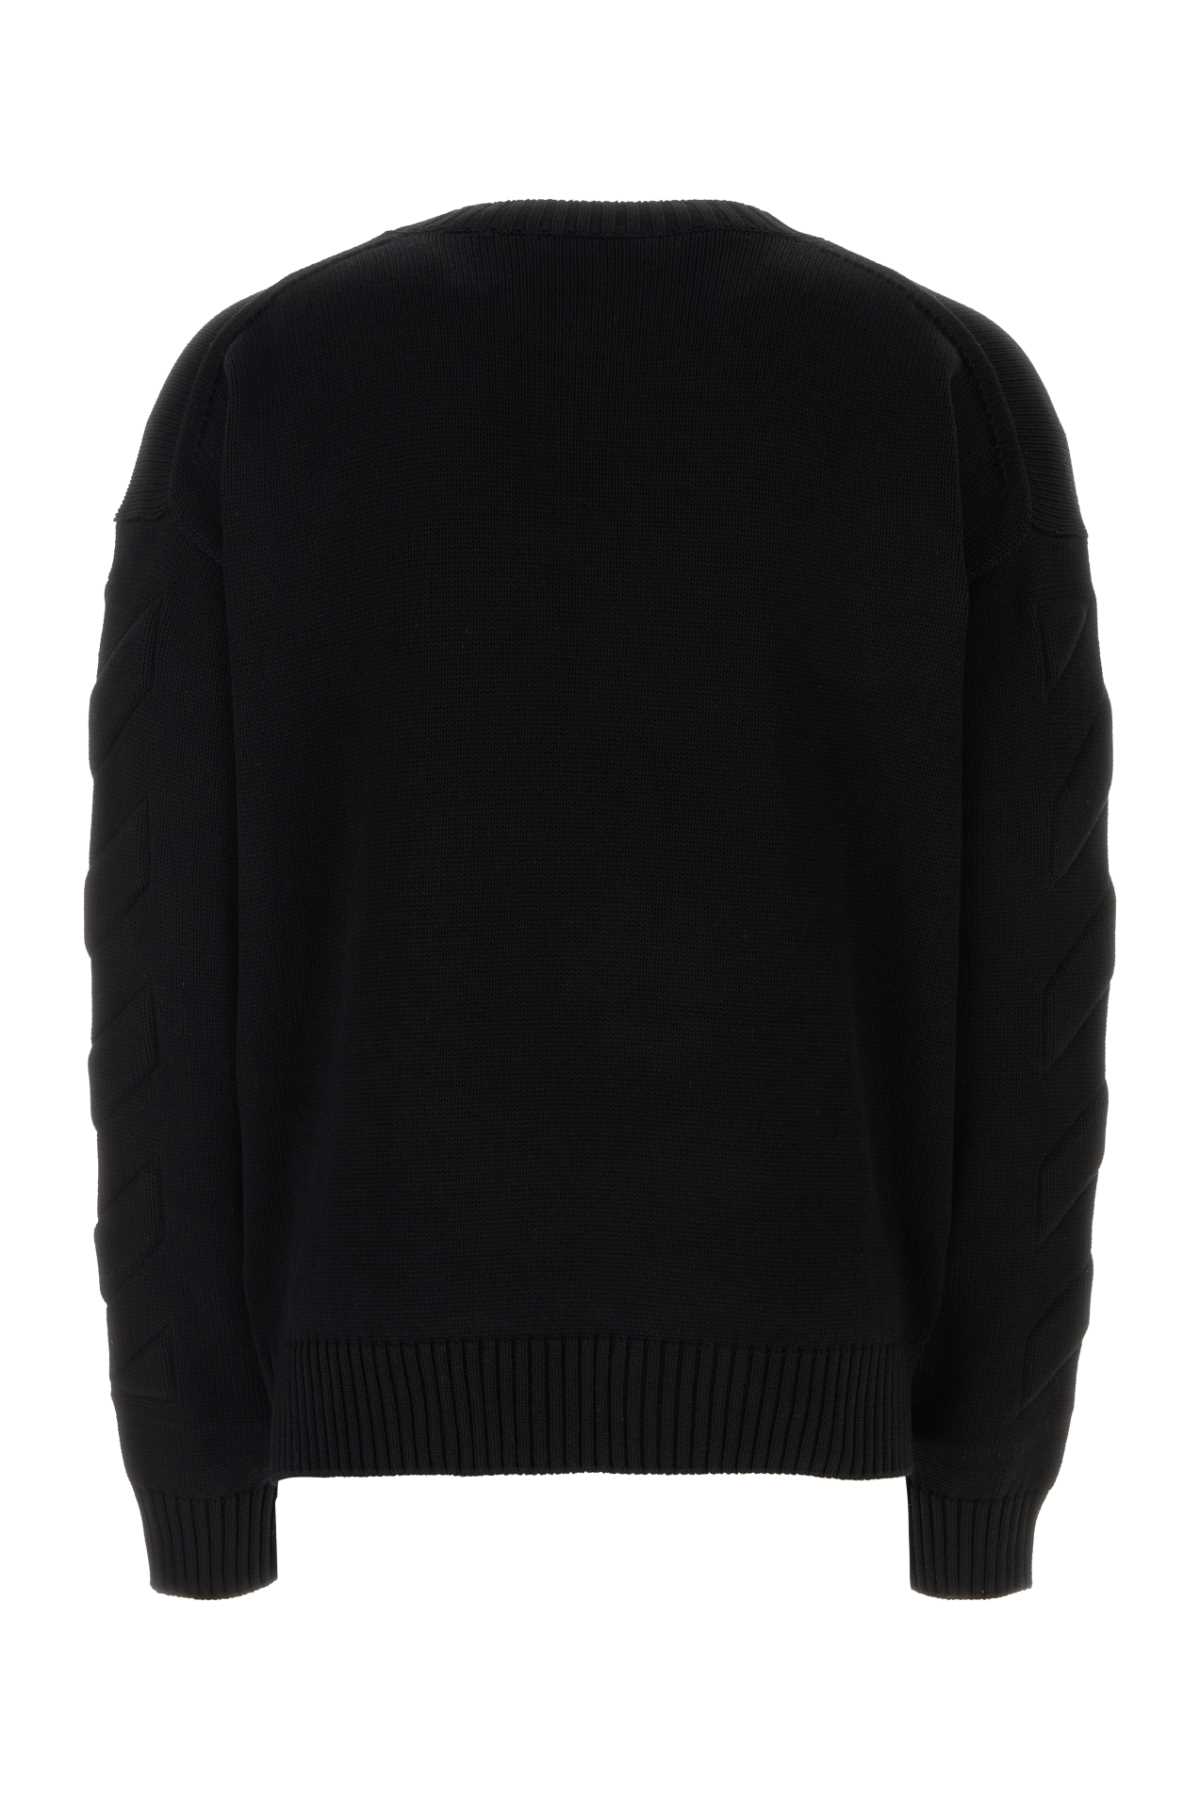 Off-white Black Stretch Cotton Blend Sweater In 1010